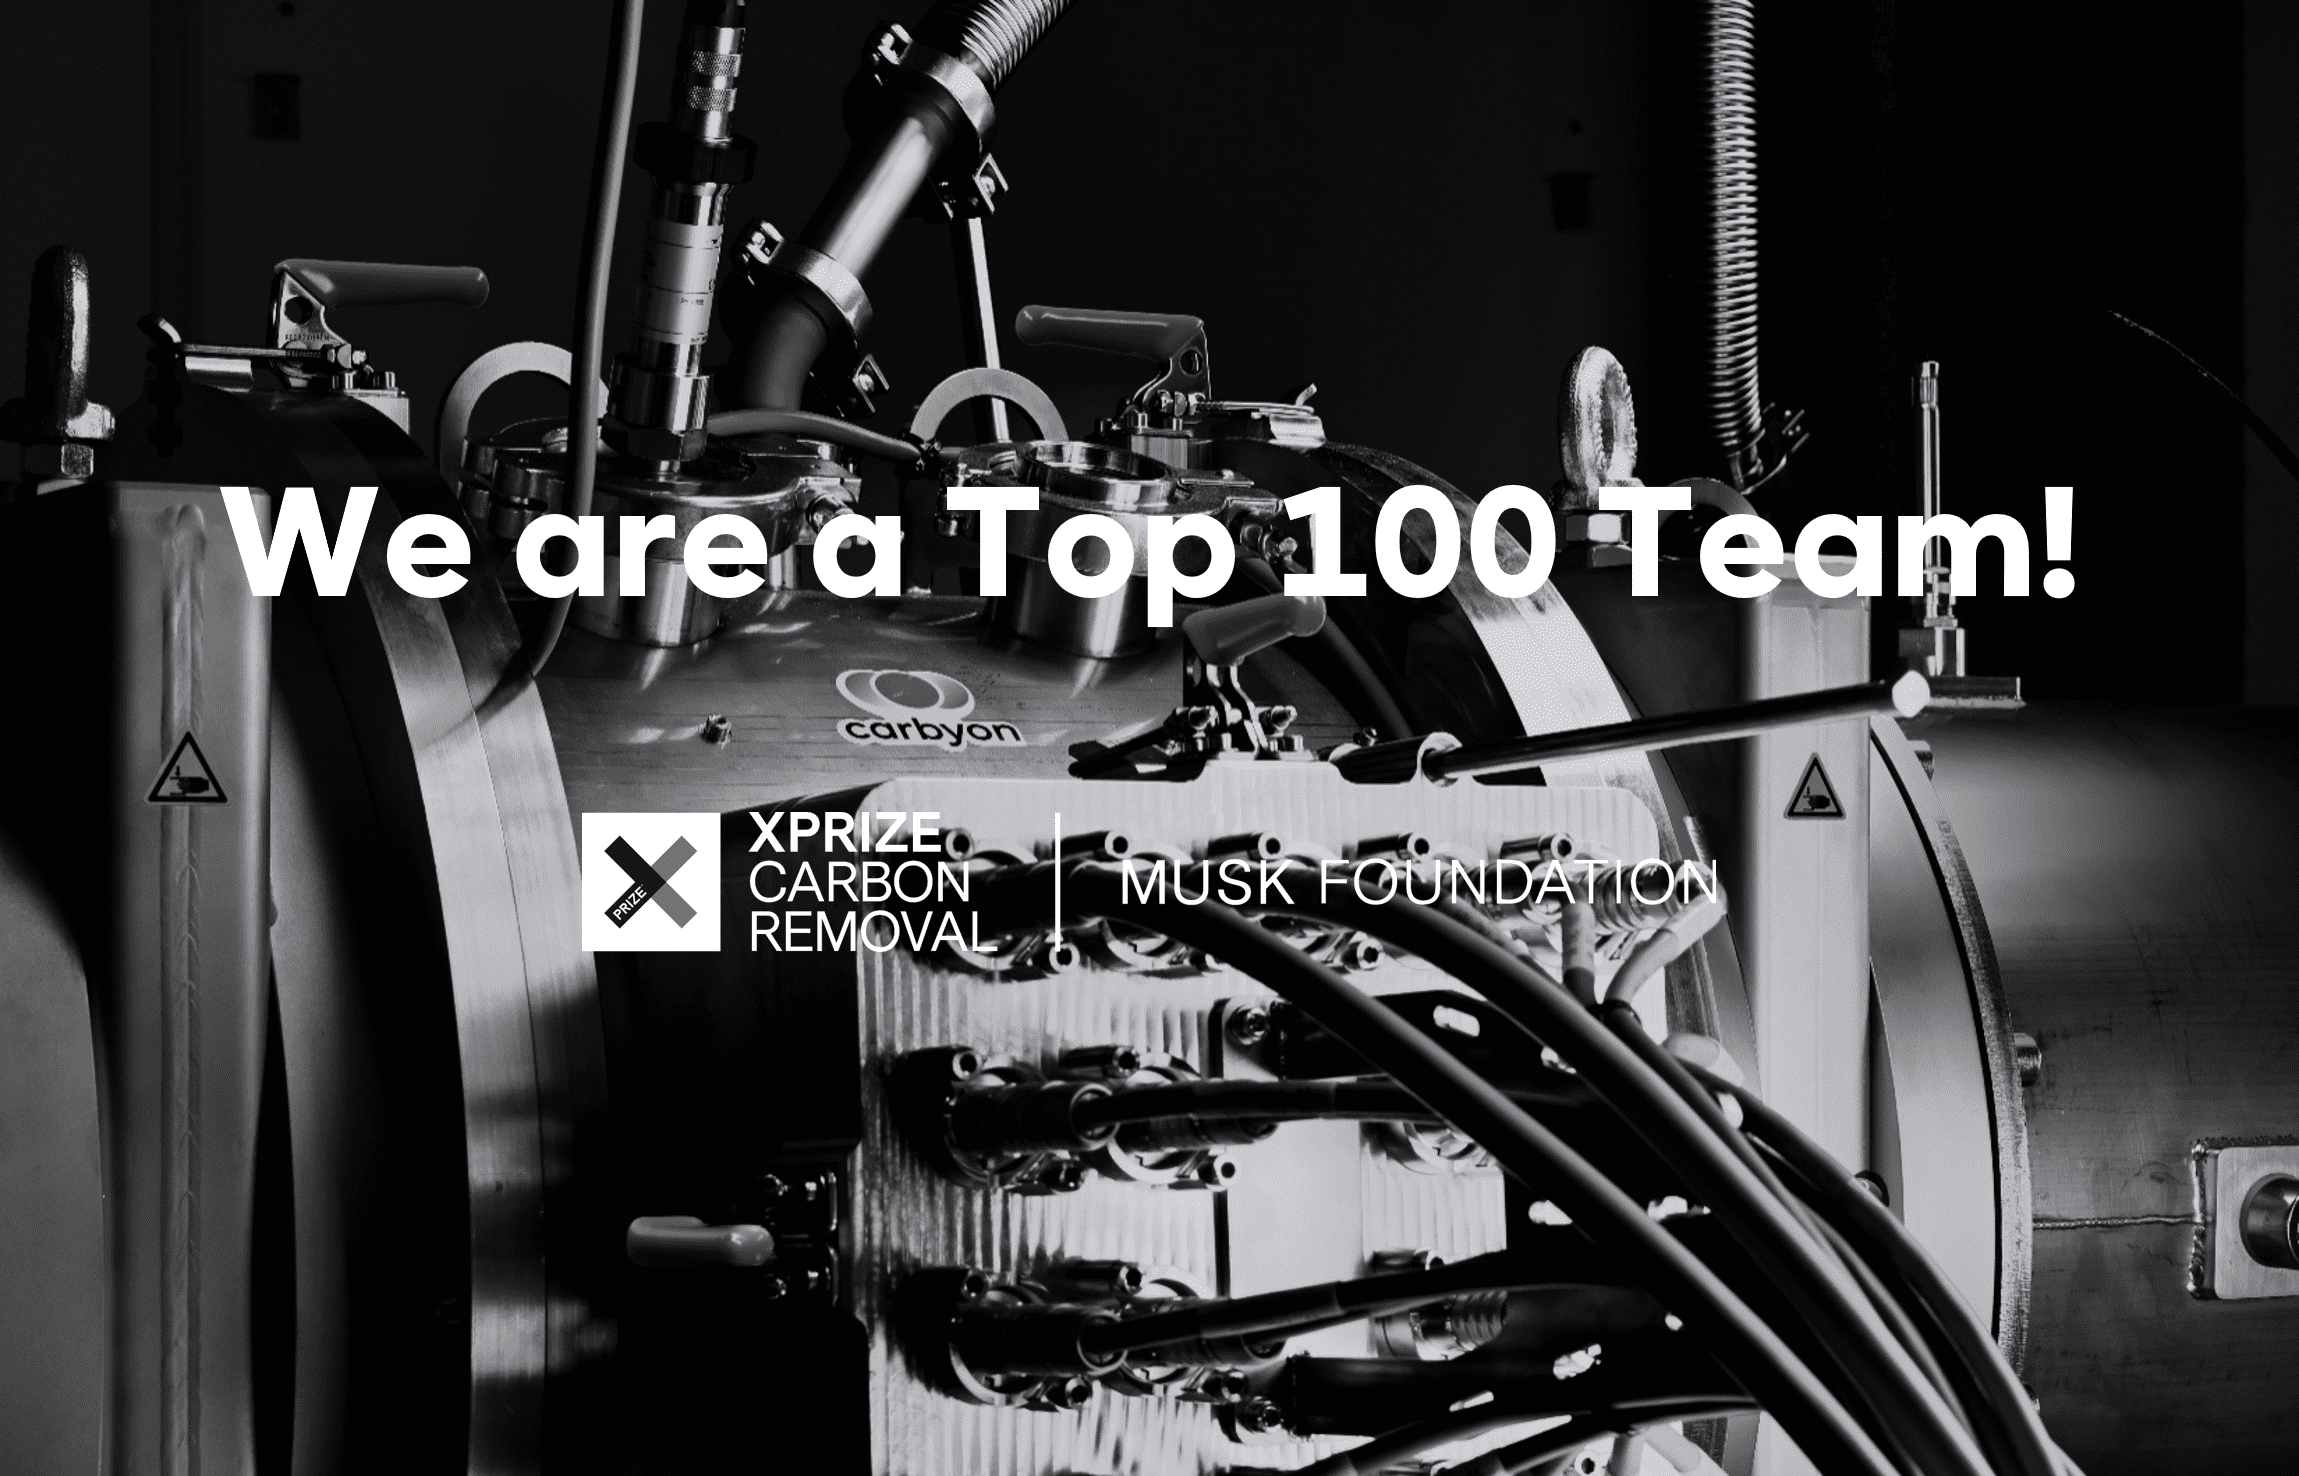 We made it to the XPRIZE Carbon Removal Top 100 teams!